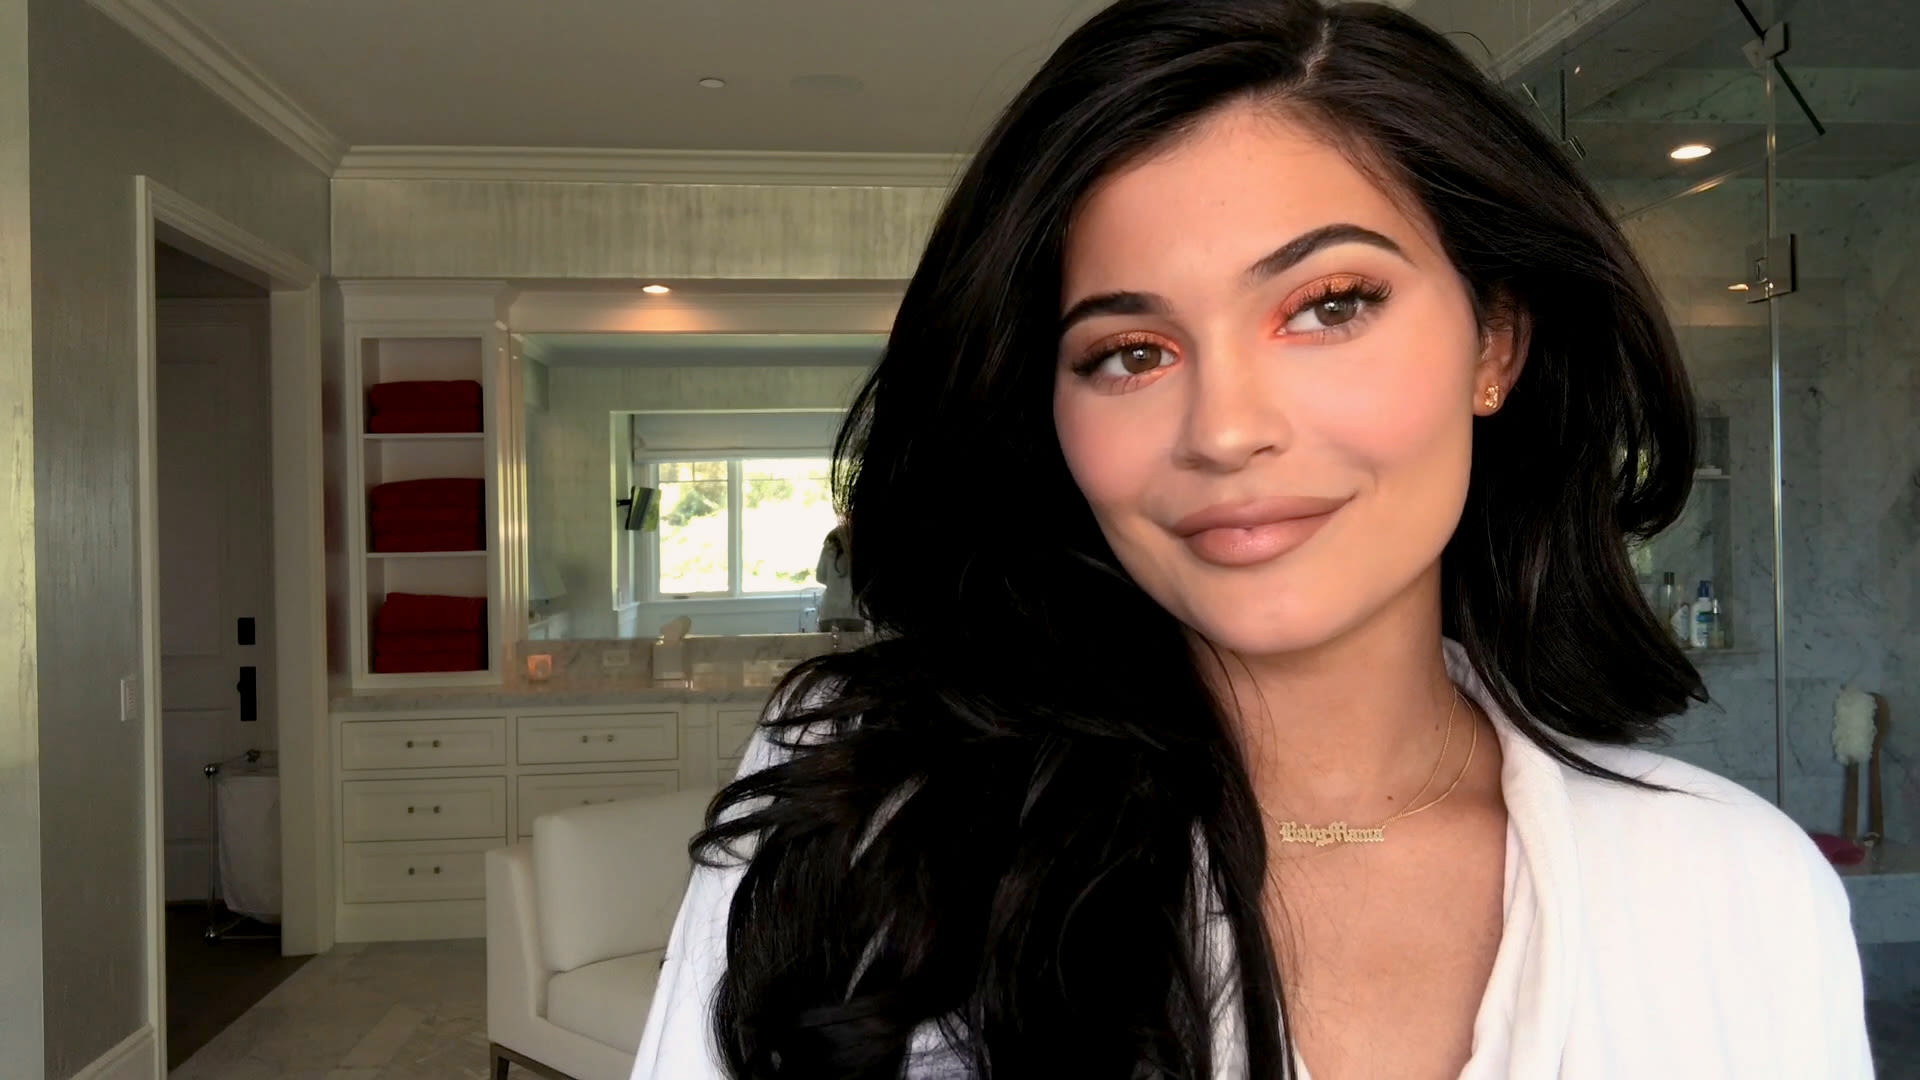 Watch Watch Kylie Jenner Do Her Lip Liner With Her Eyes Closed—and